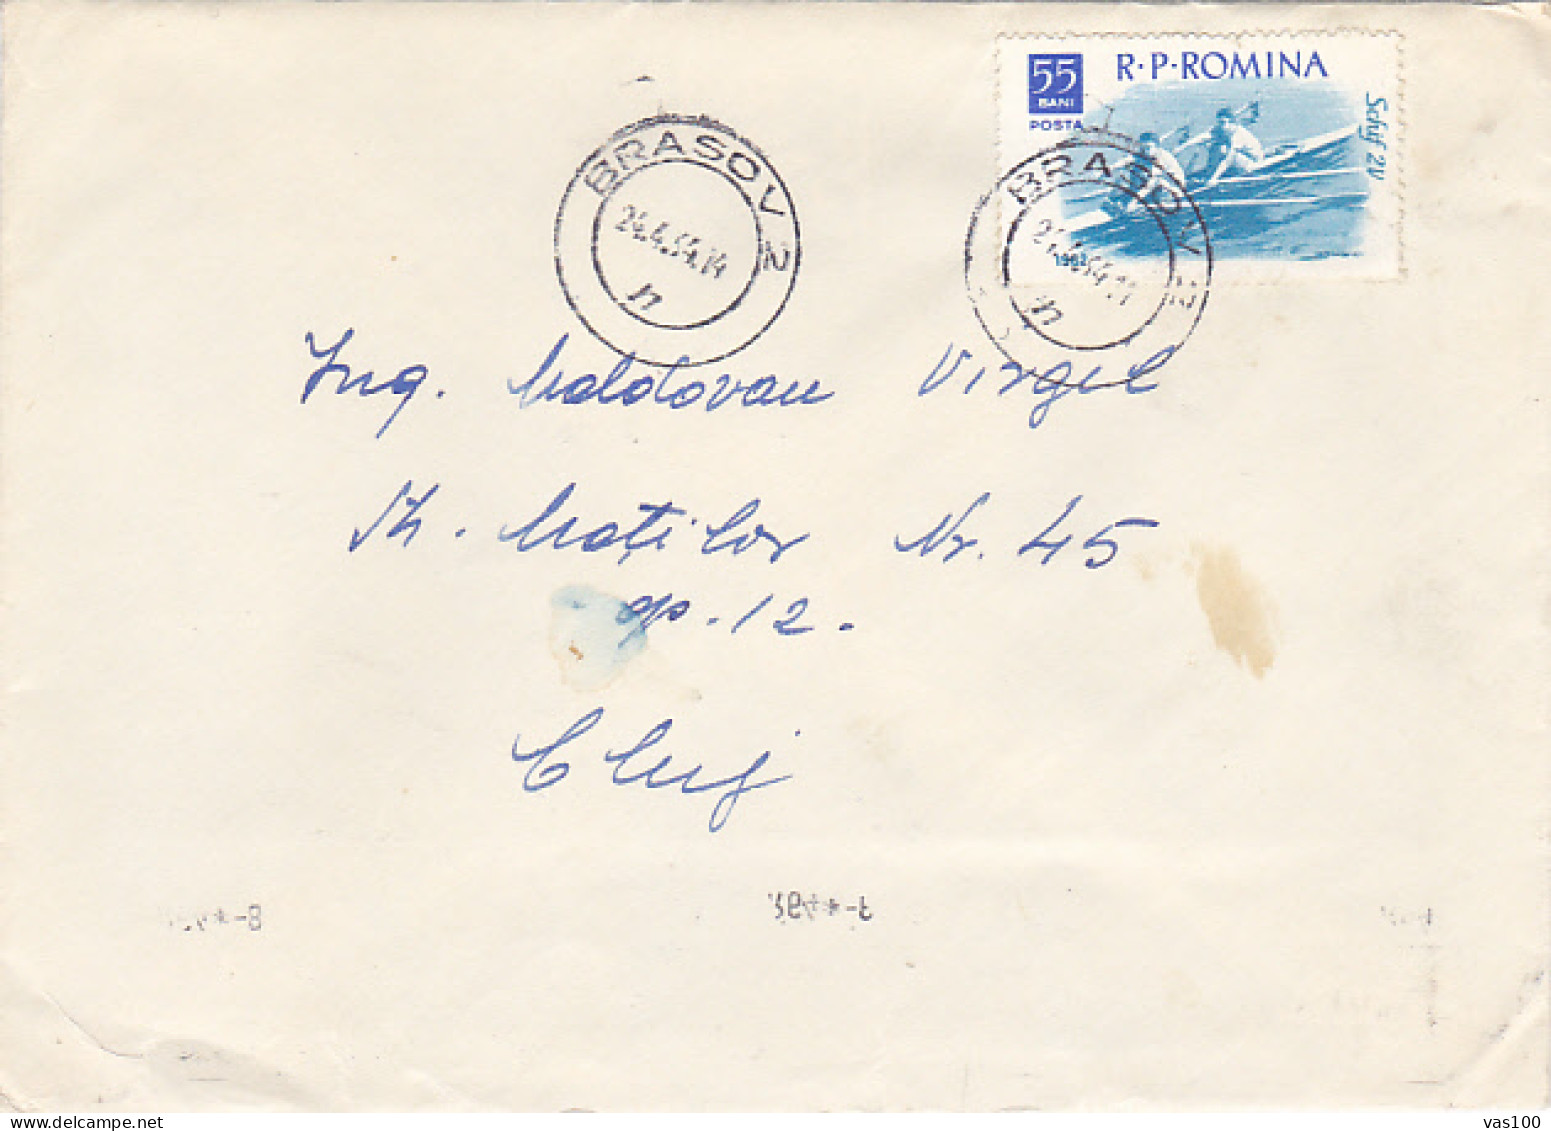 ROWING, TEAM OF 2, STAMP ON COVER, 1964, ROMANIA - Briefe U. Dokumente